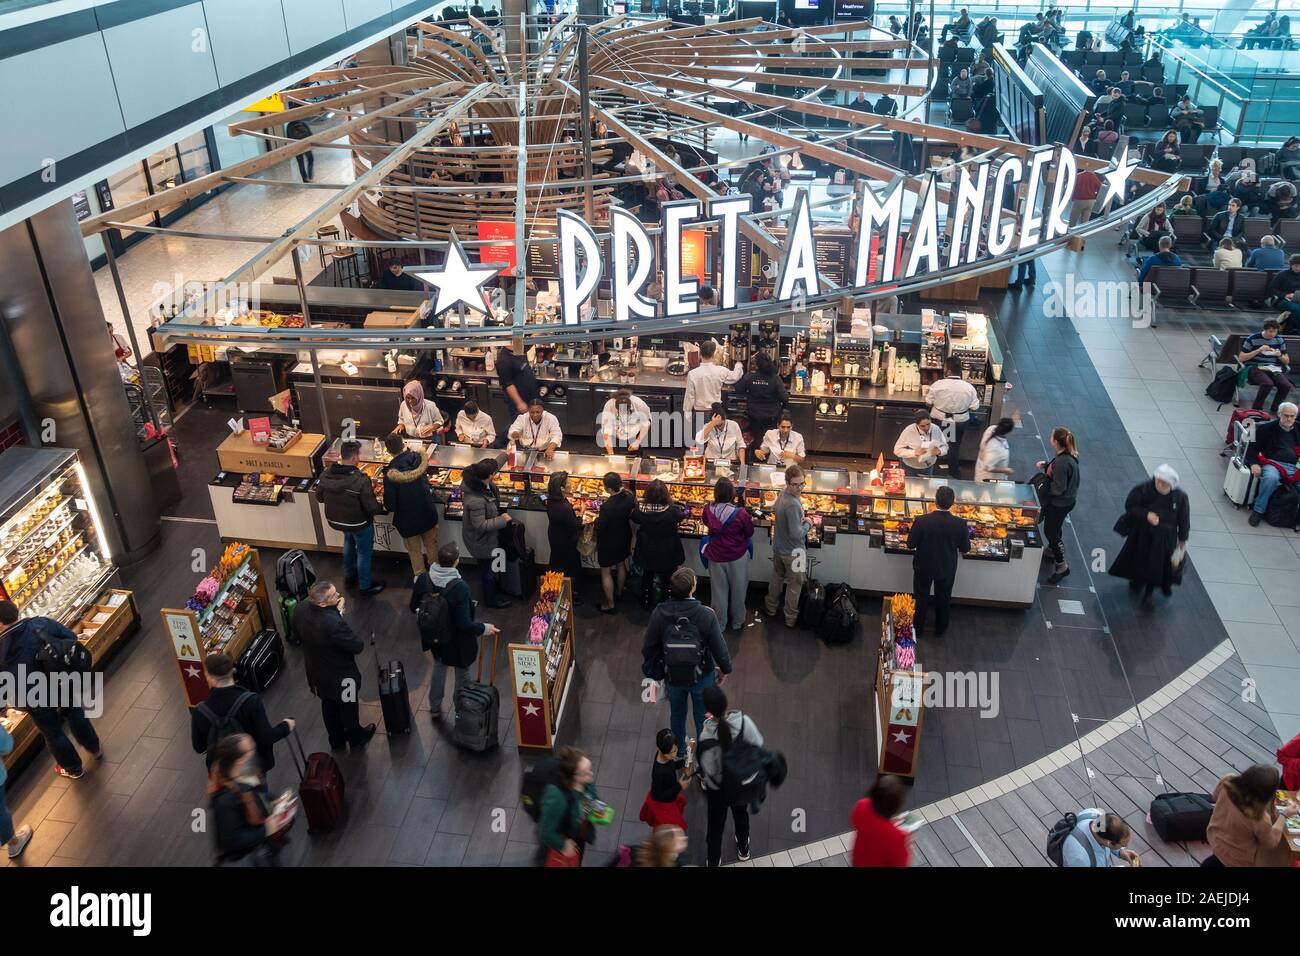 The Pret a Manger sandwich shop and cafe in the departures lounge at Heathrow Airport, Terminal 5 in London, UK Stock Photo